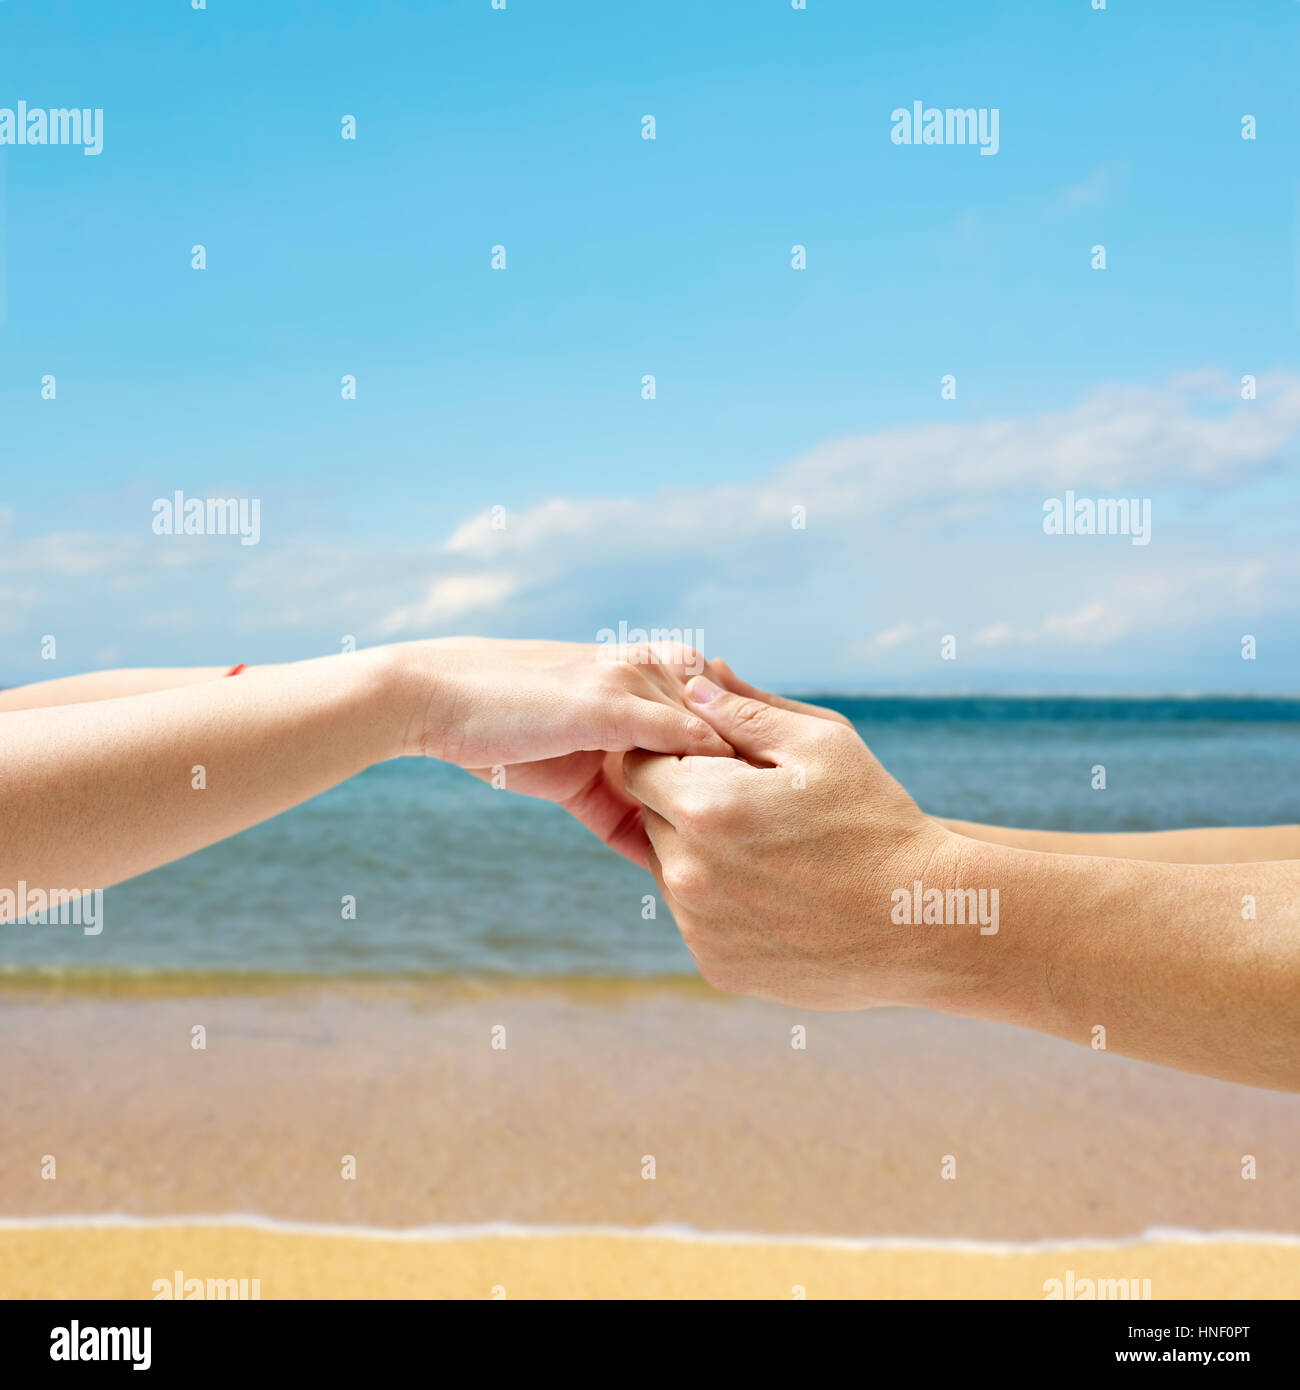 hands of a young couple held together against a sky, sea and beach background. Stock Photo